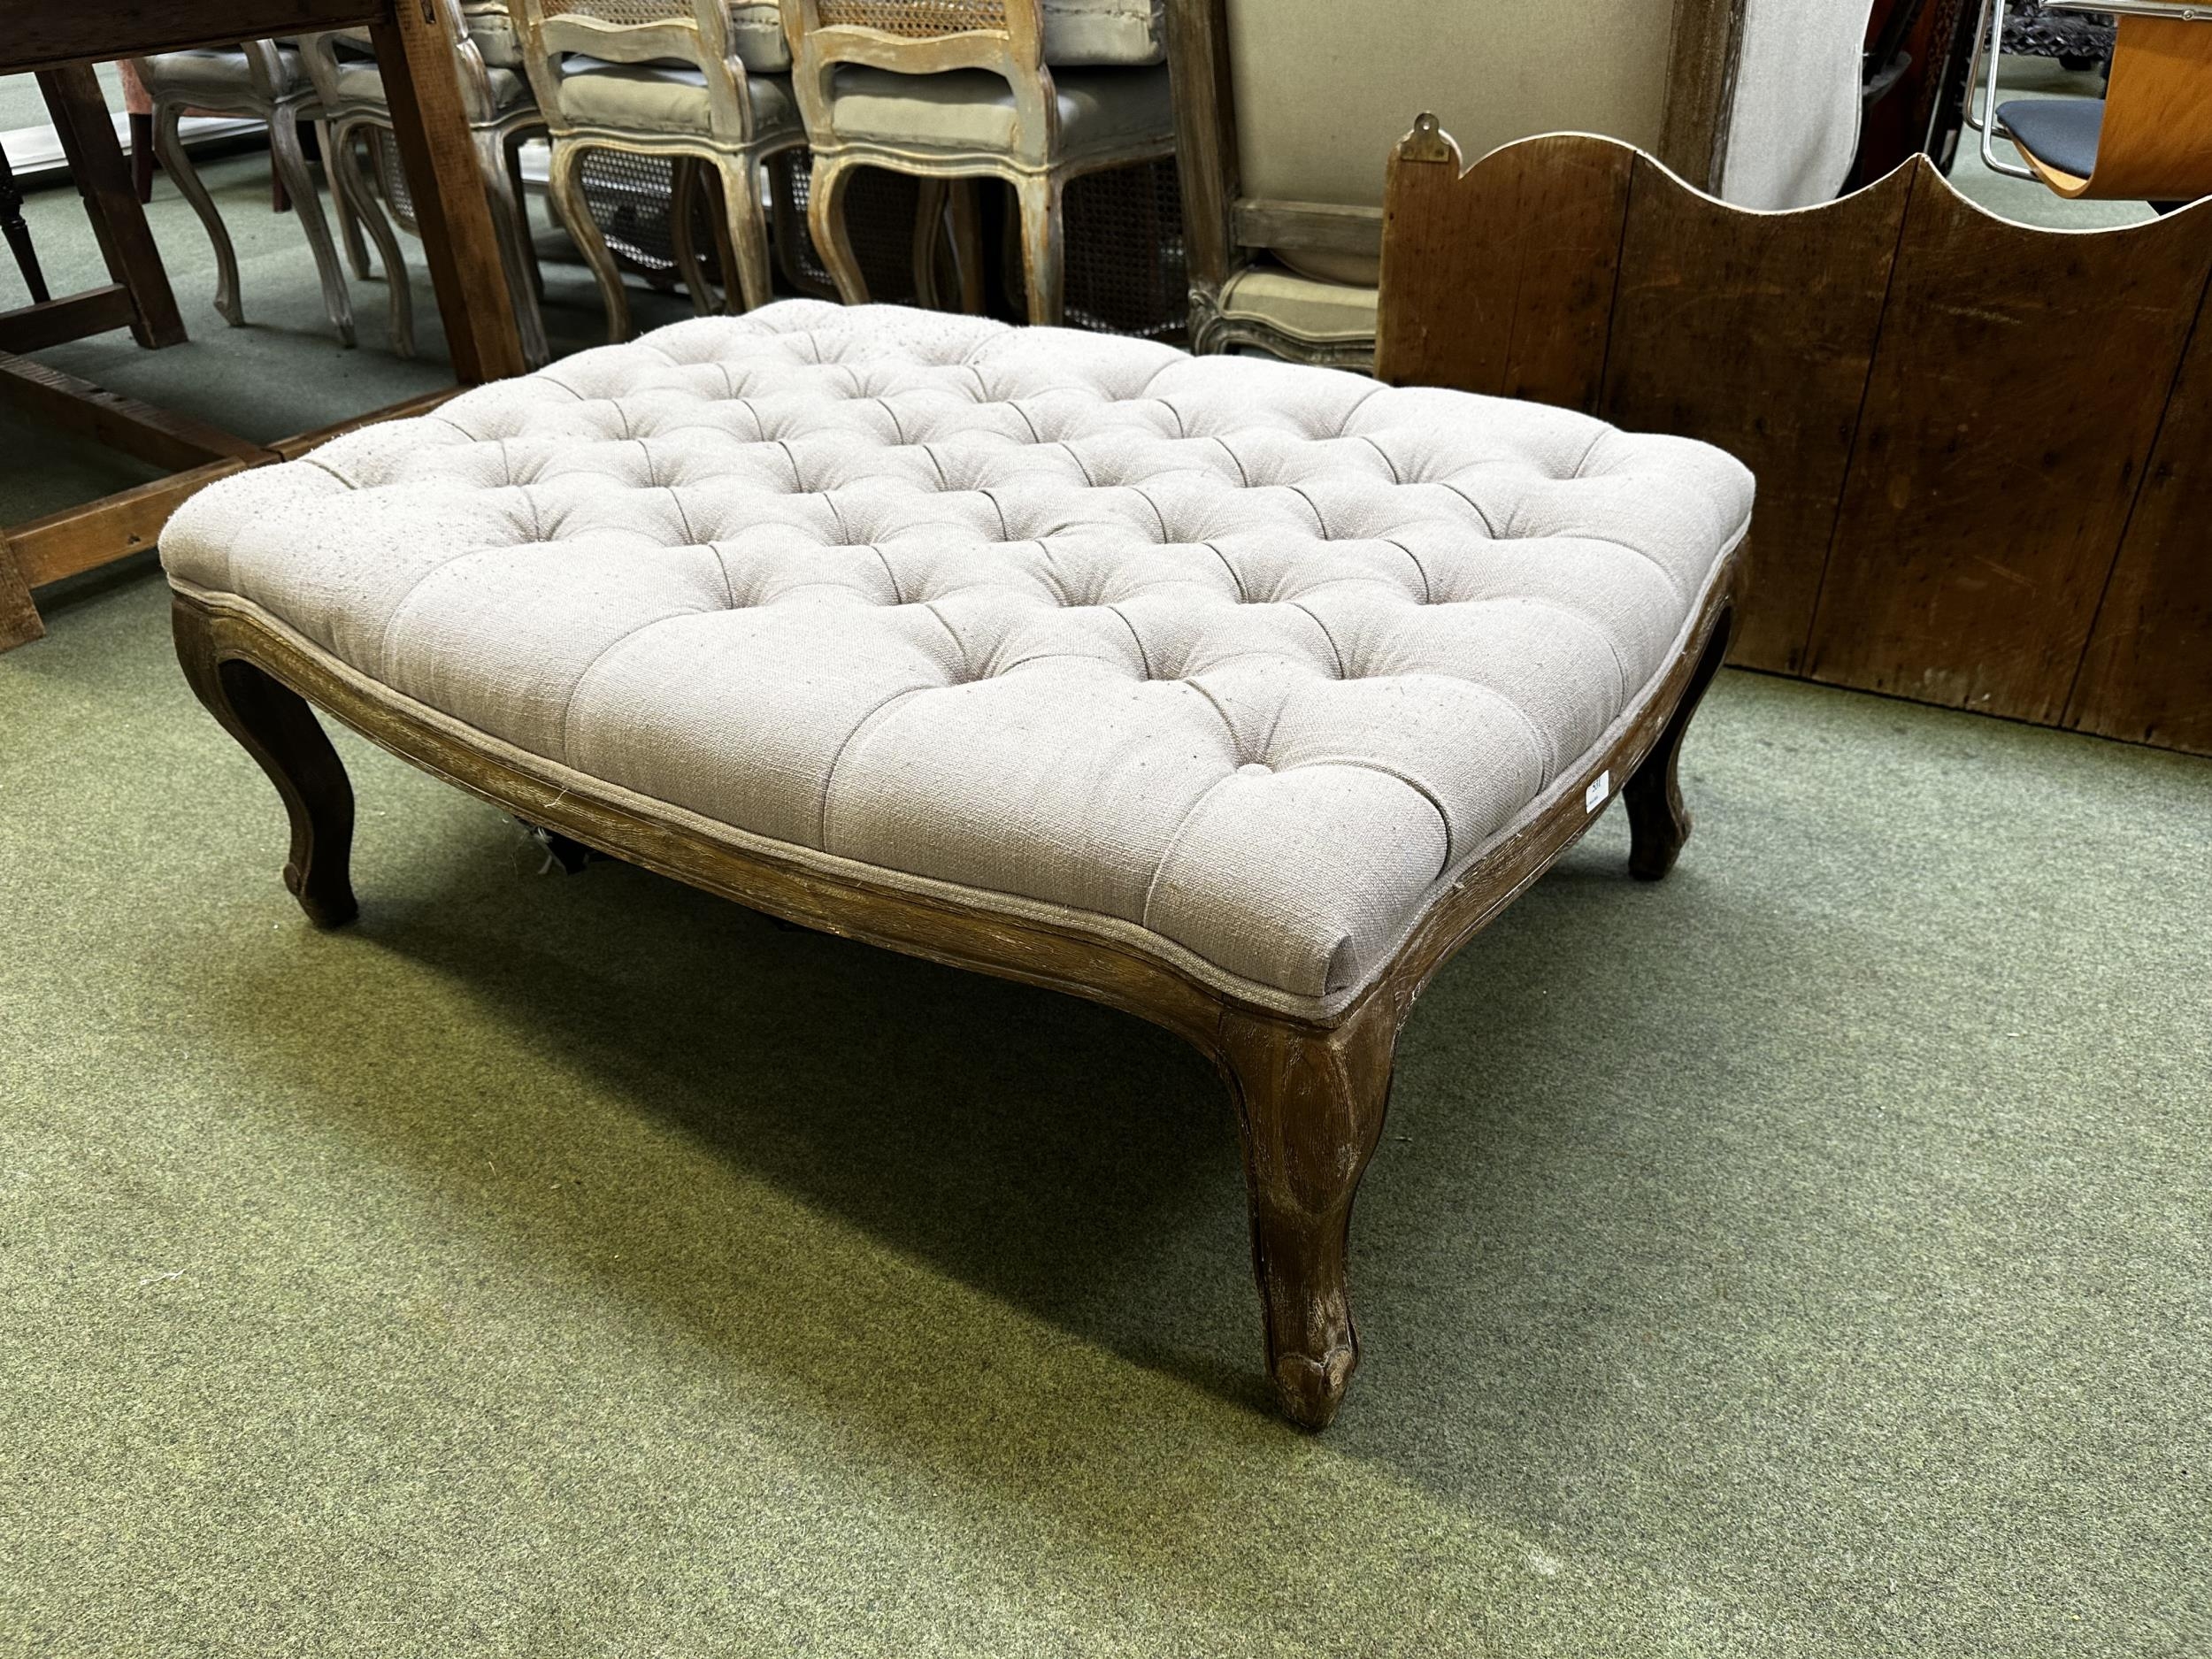 A modern Oka style foot stool with buttoned upholstery, 105 x 74cm - Image 3 of 4